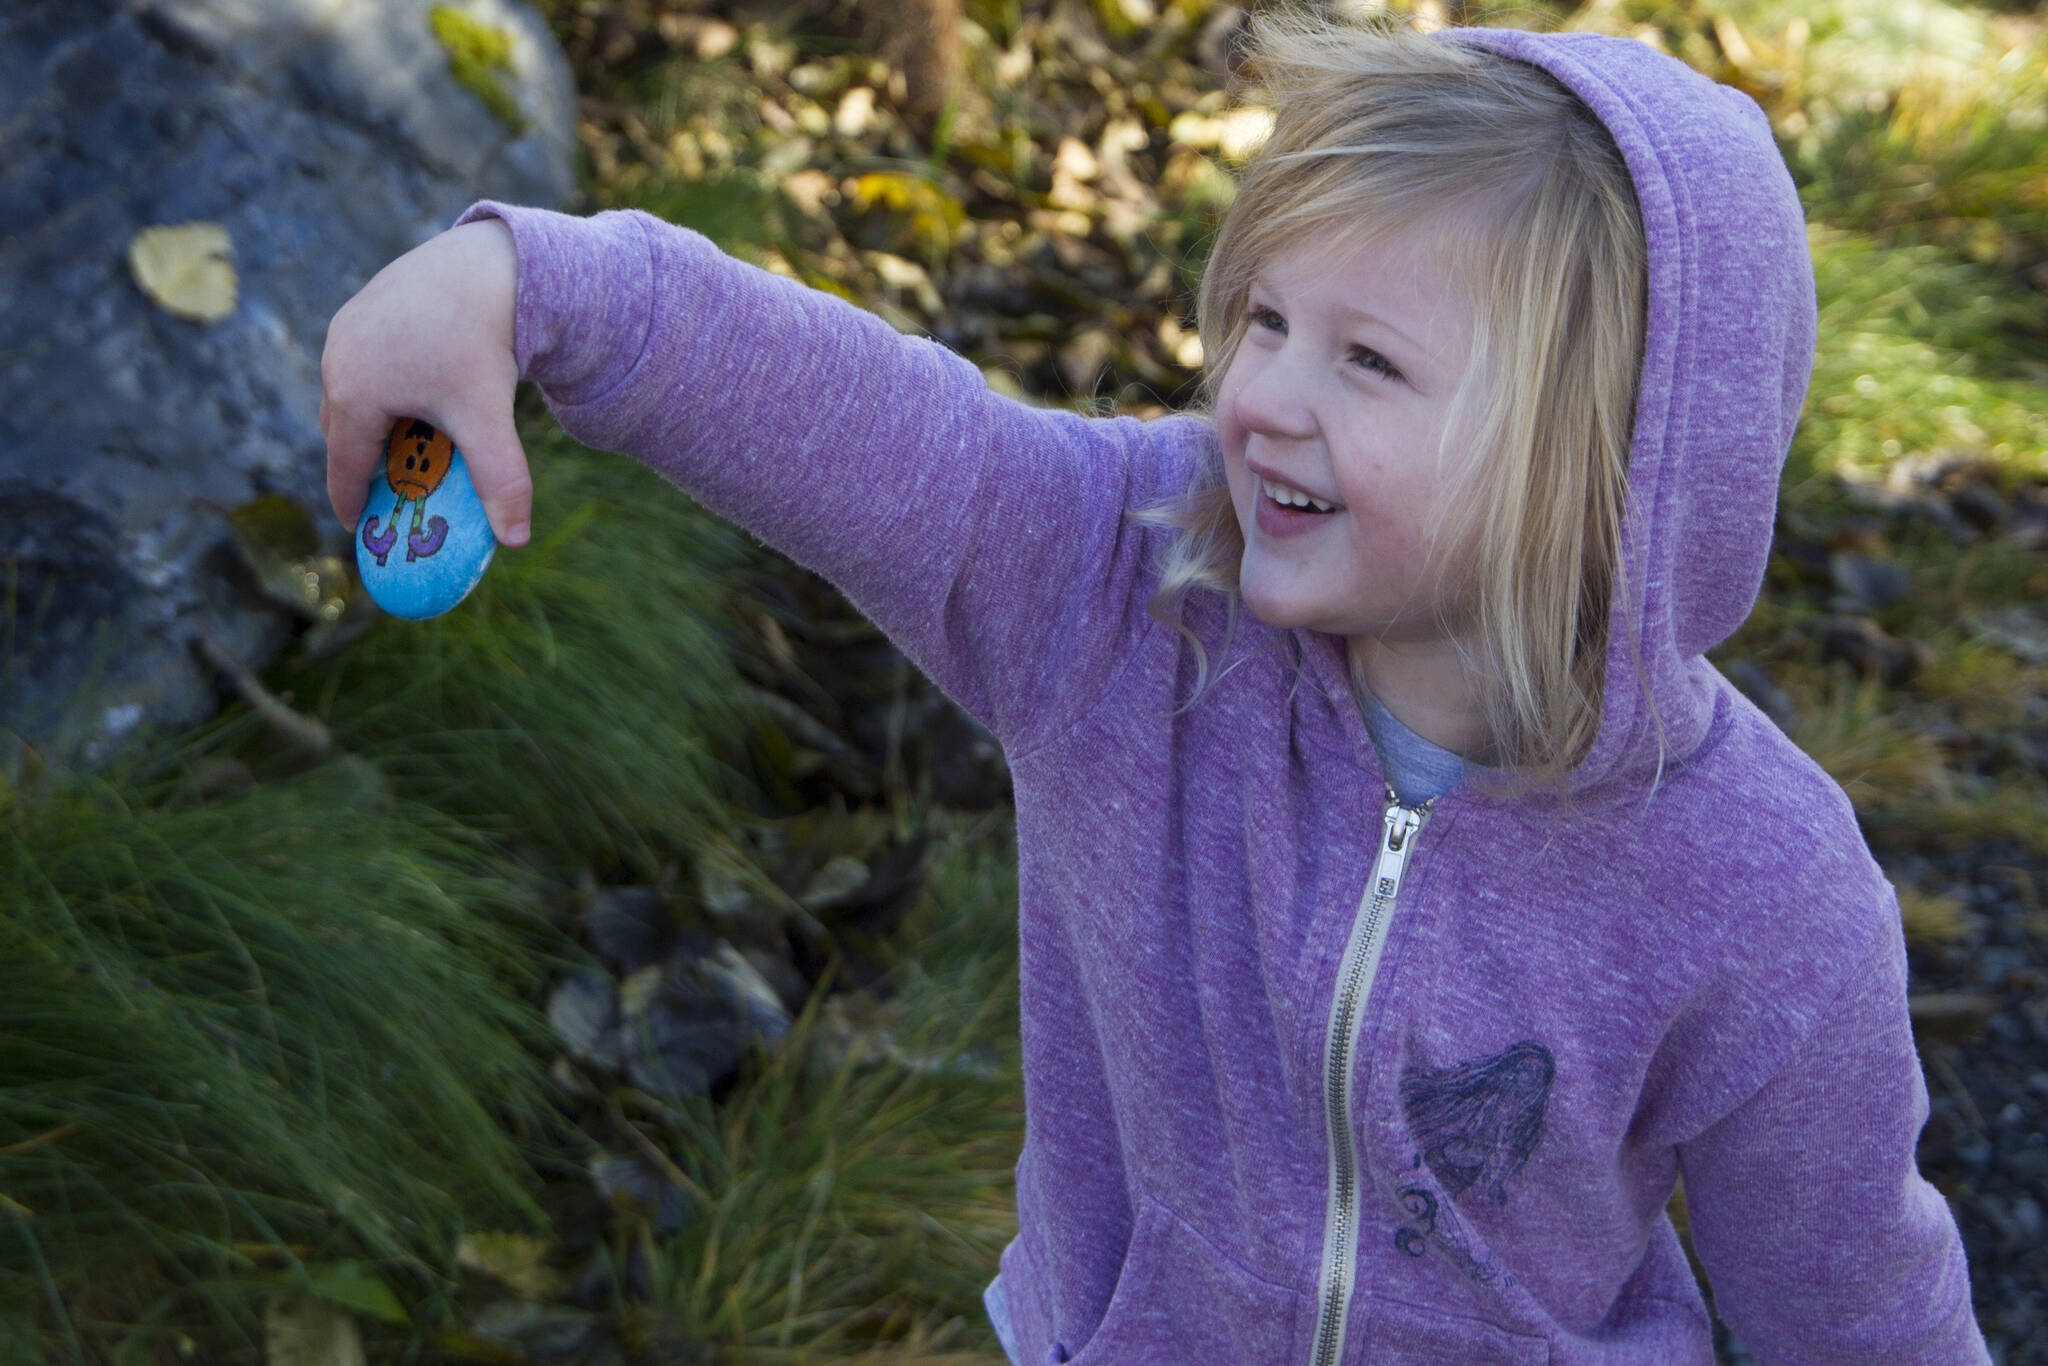 A little girl shows off the rock she found during the Homer Rocks Halloween scavenger hunt at the Islands and Oceans Center on Sunday, Oct. 24. (Photo by Sarah Knapp/Homer News)